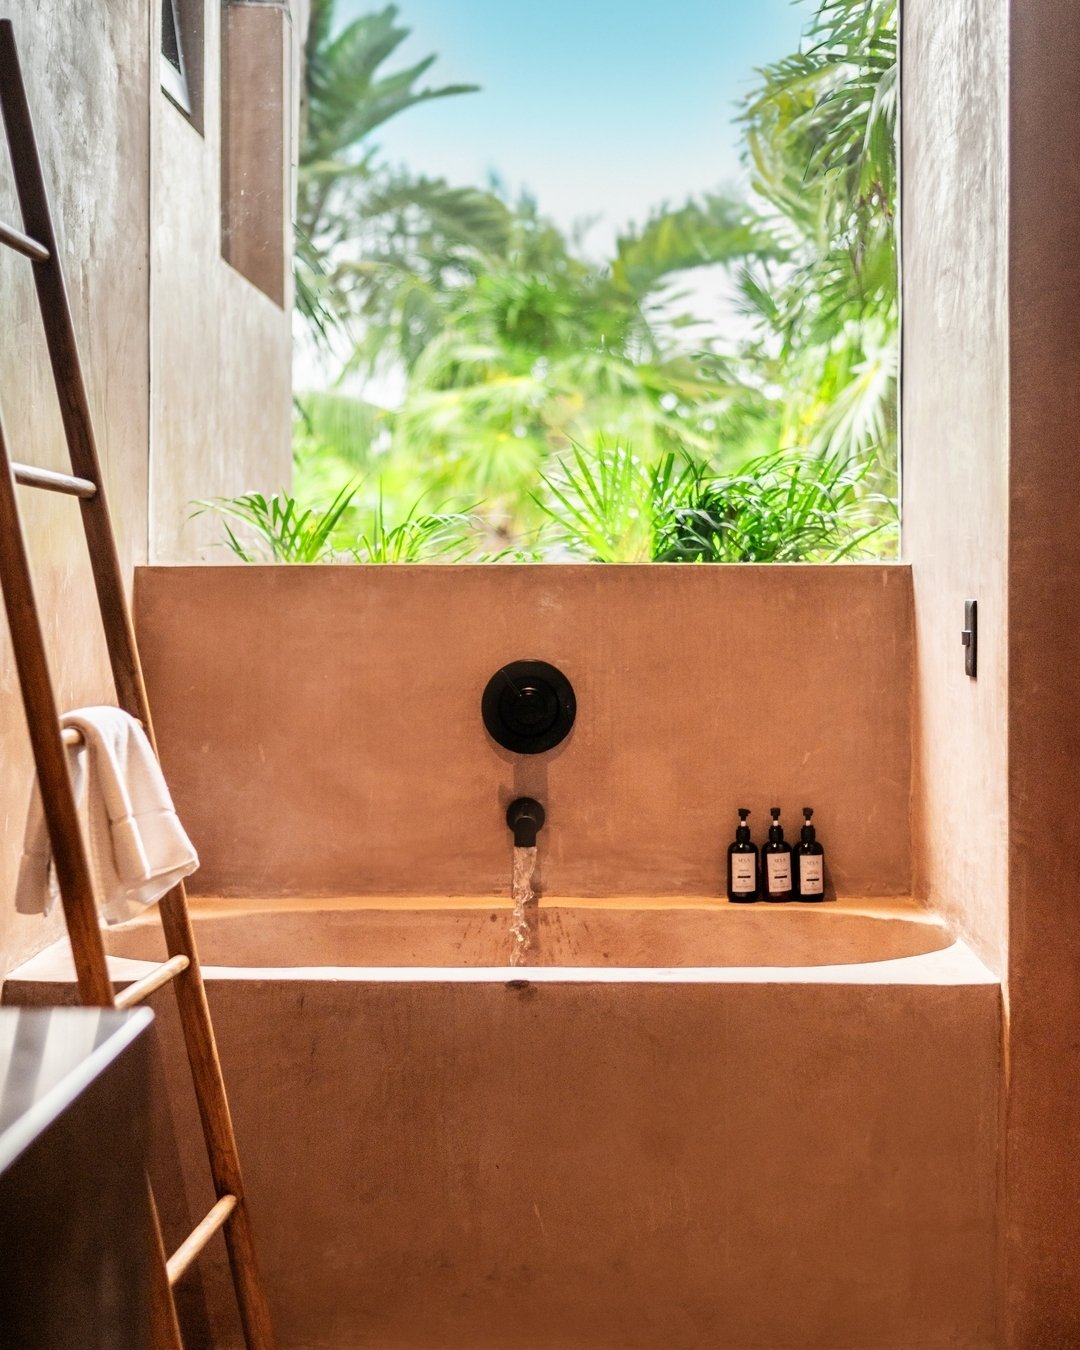 How about a bath al fresco? Immerse yourself in the luxurious amenities provided by @loredanamexico as you luxuriate in the soothing waters, all while the gentle breeze rustles through the palm fronds.

&iquest;Qu&eacute; tal un ba&ntilde;o al aire l